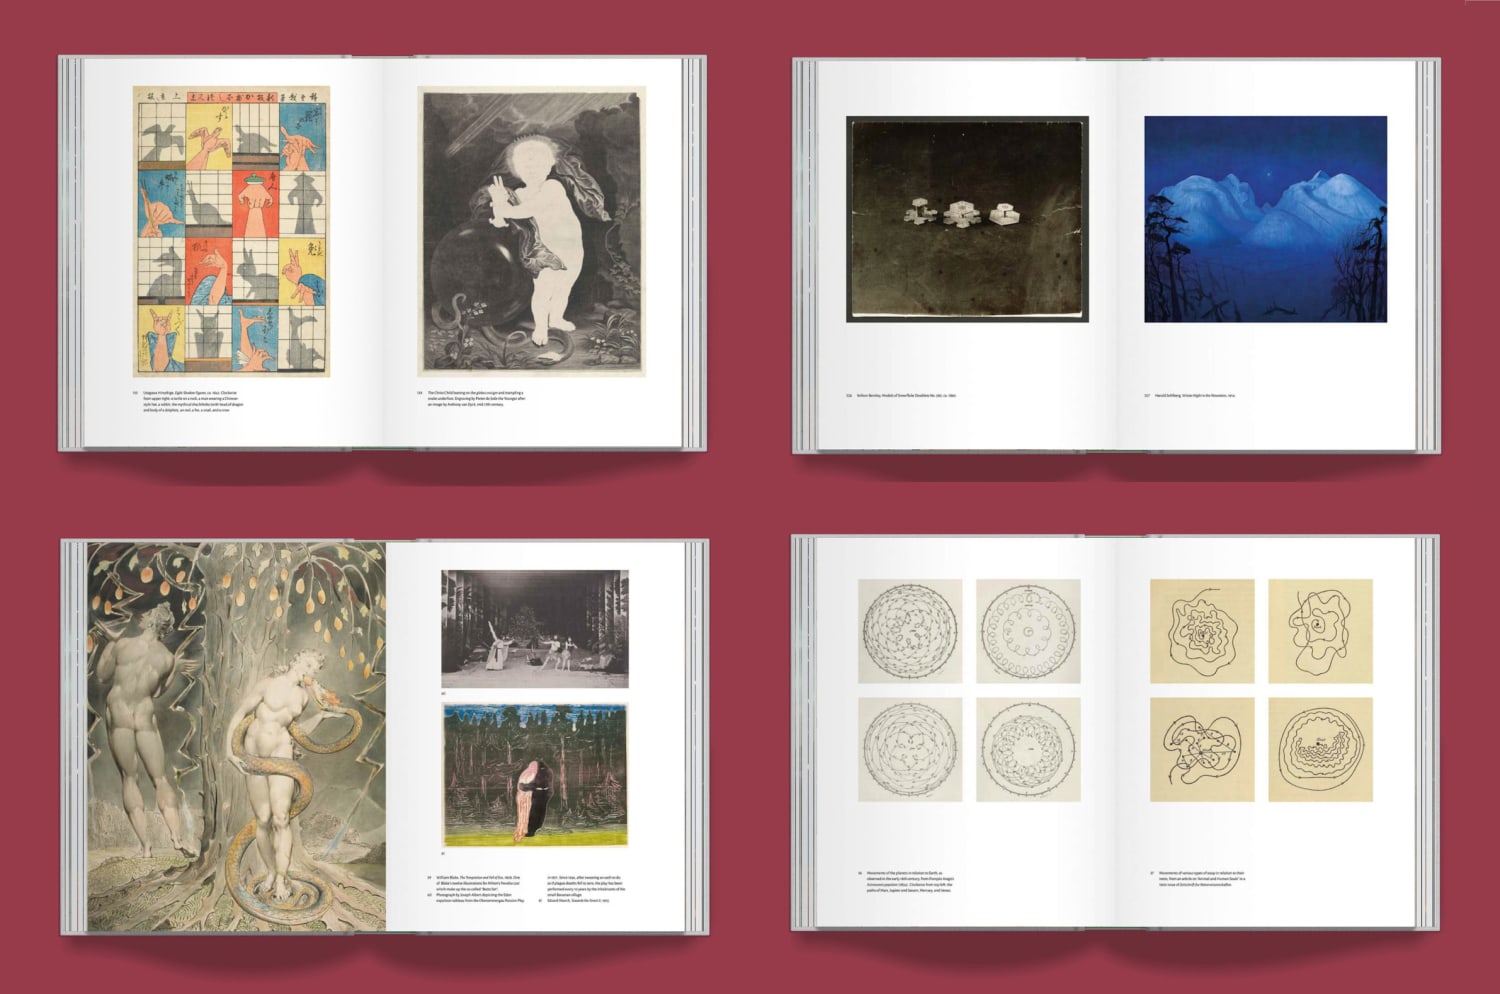 A Deeper Dive into *Affinities*, Our New Book of Images